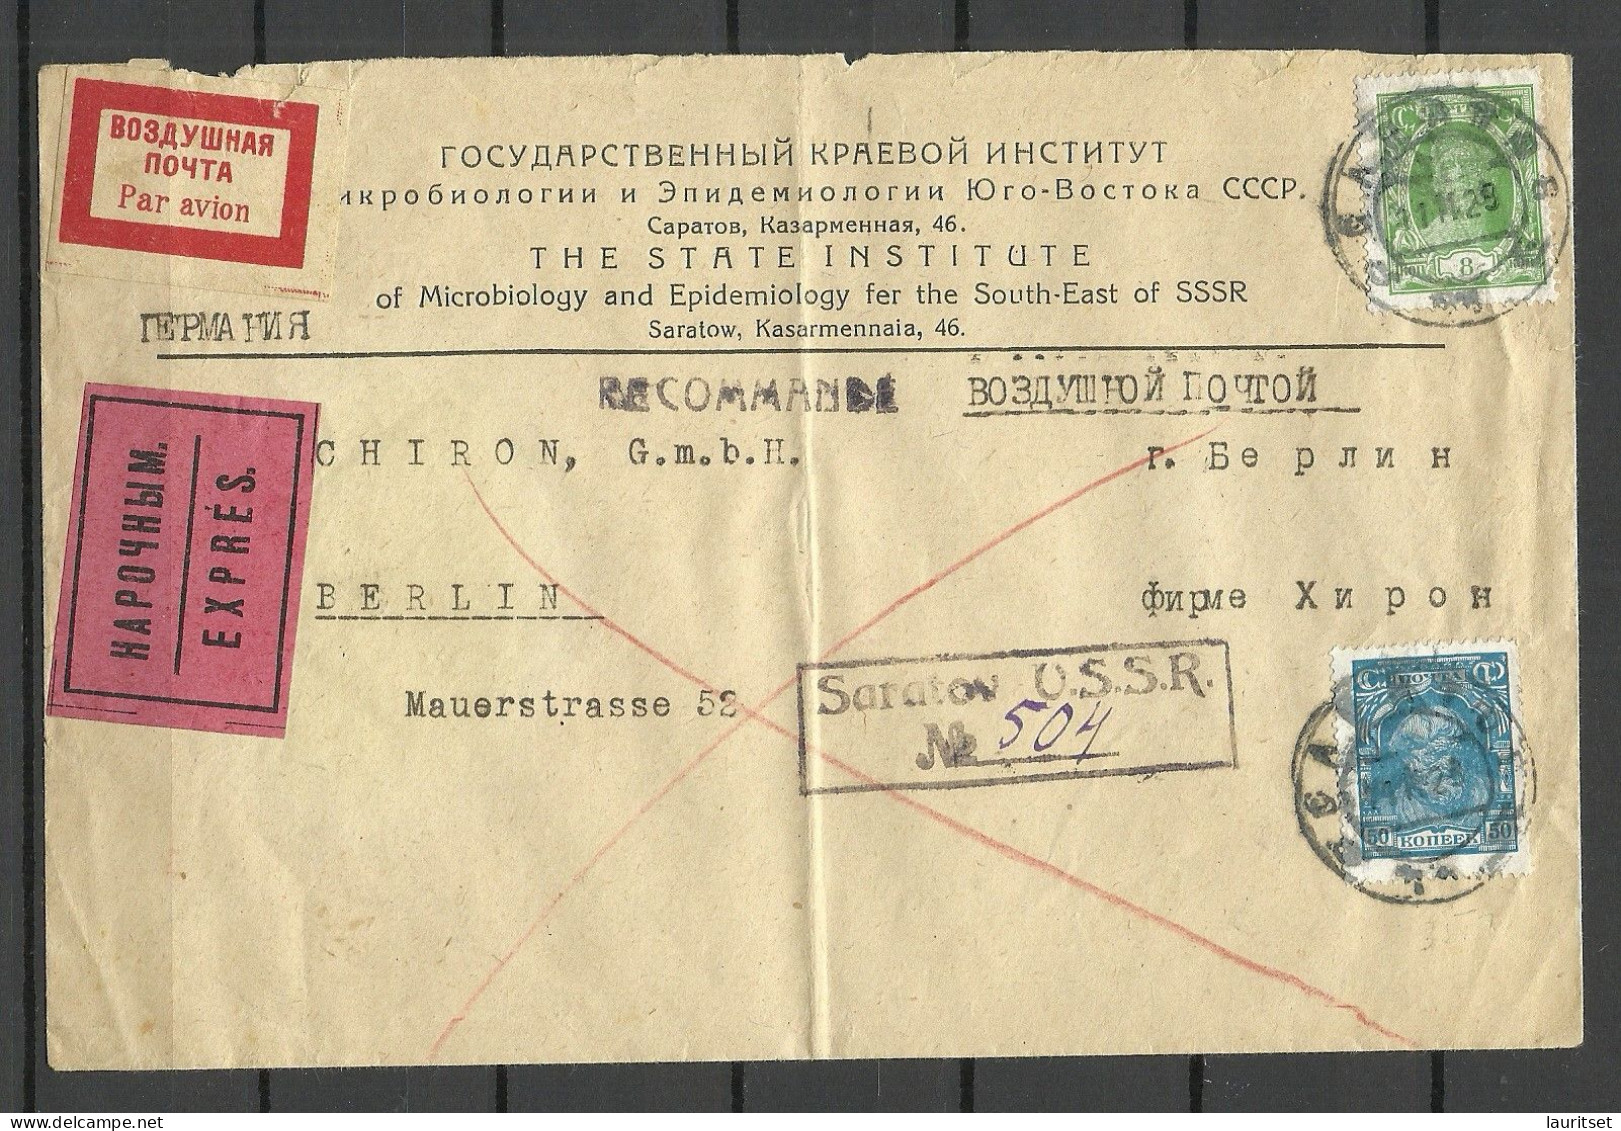 RUSSLAND RUSSIA Soviet Union 1928 Expres Air Mail Cover O Saratow To Germany NB! Vertical Fold In The Middle - Briefe U. Dokumente